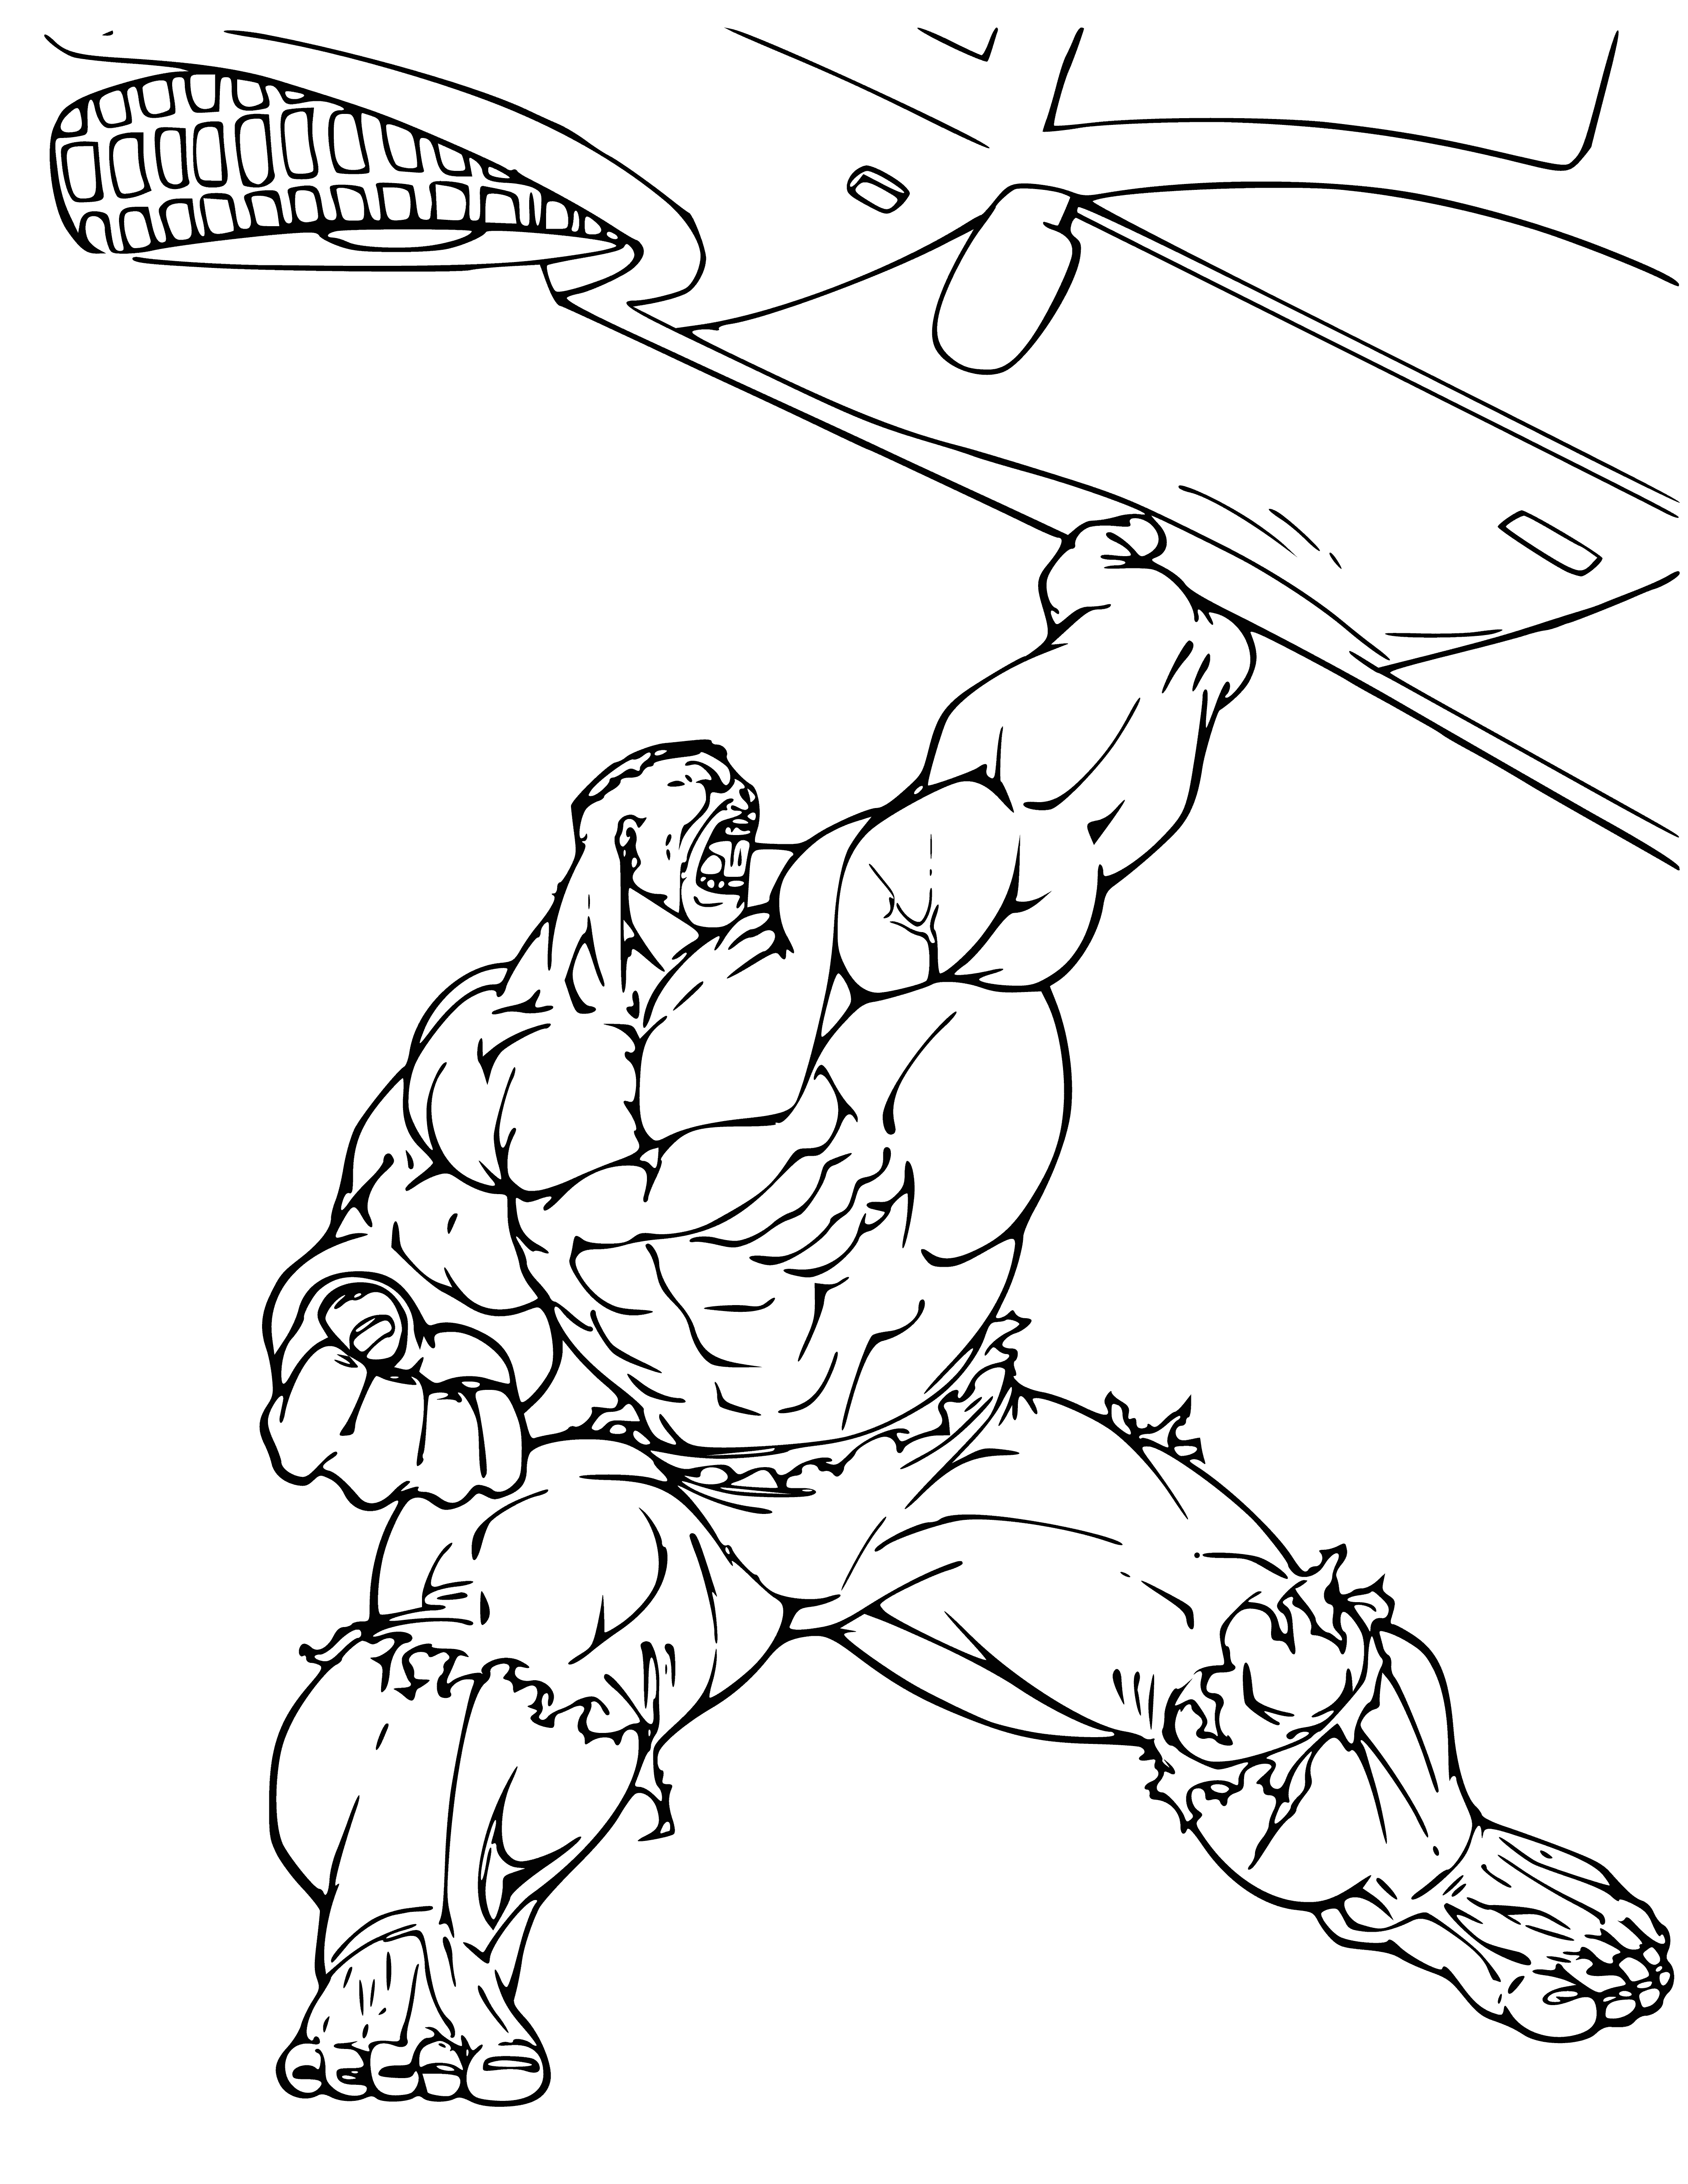 coloring page: The Hulk is a green giant with incredible strength and an alter-ego of a gentle yet powerful hero, beloved by fans around the world.